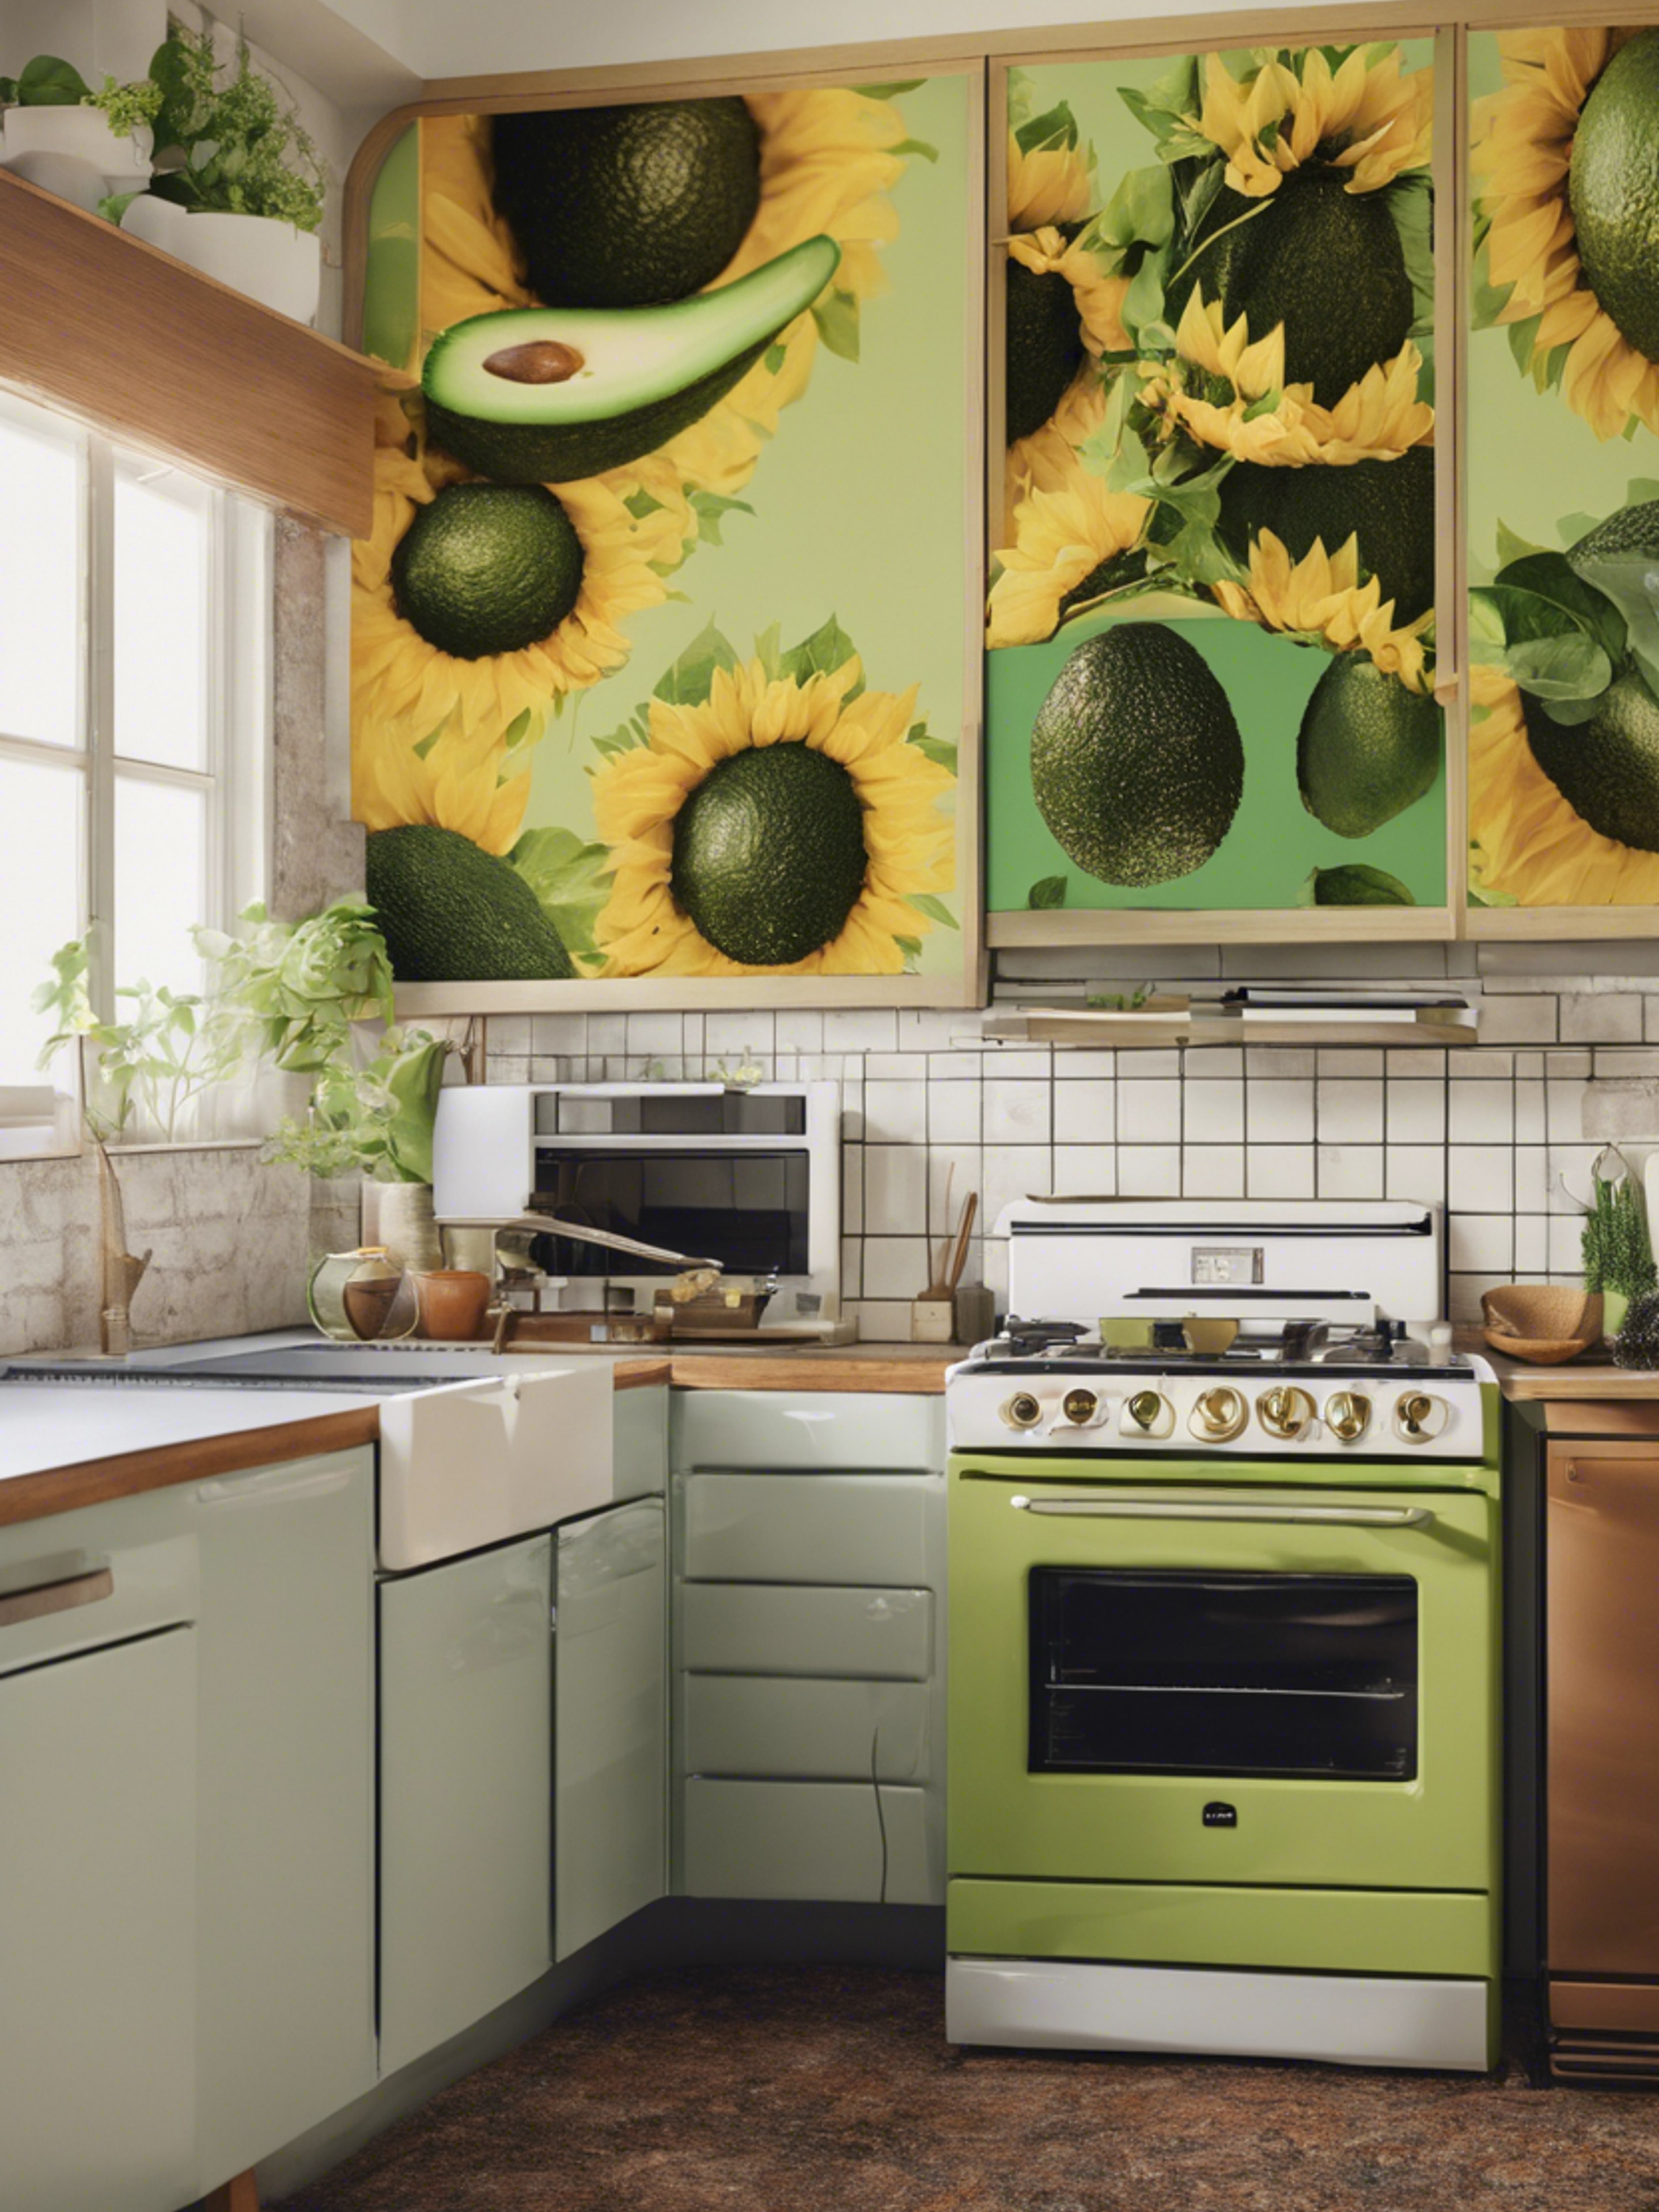 A 70s kitchen with avocado green appliances and oversized sunflower prints Tapeet[58674ee3cd464da7b0a1]